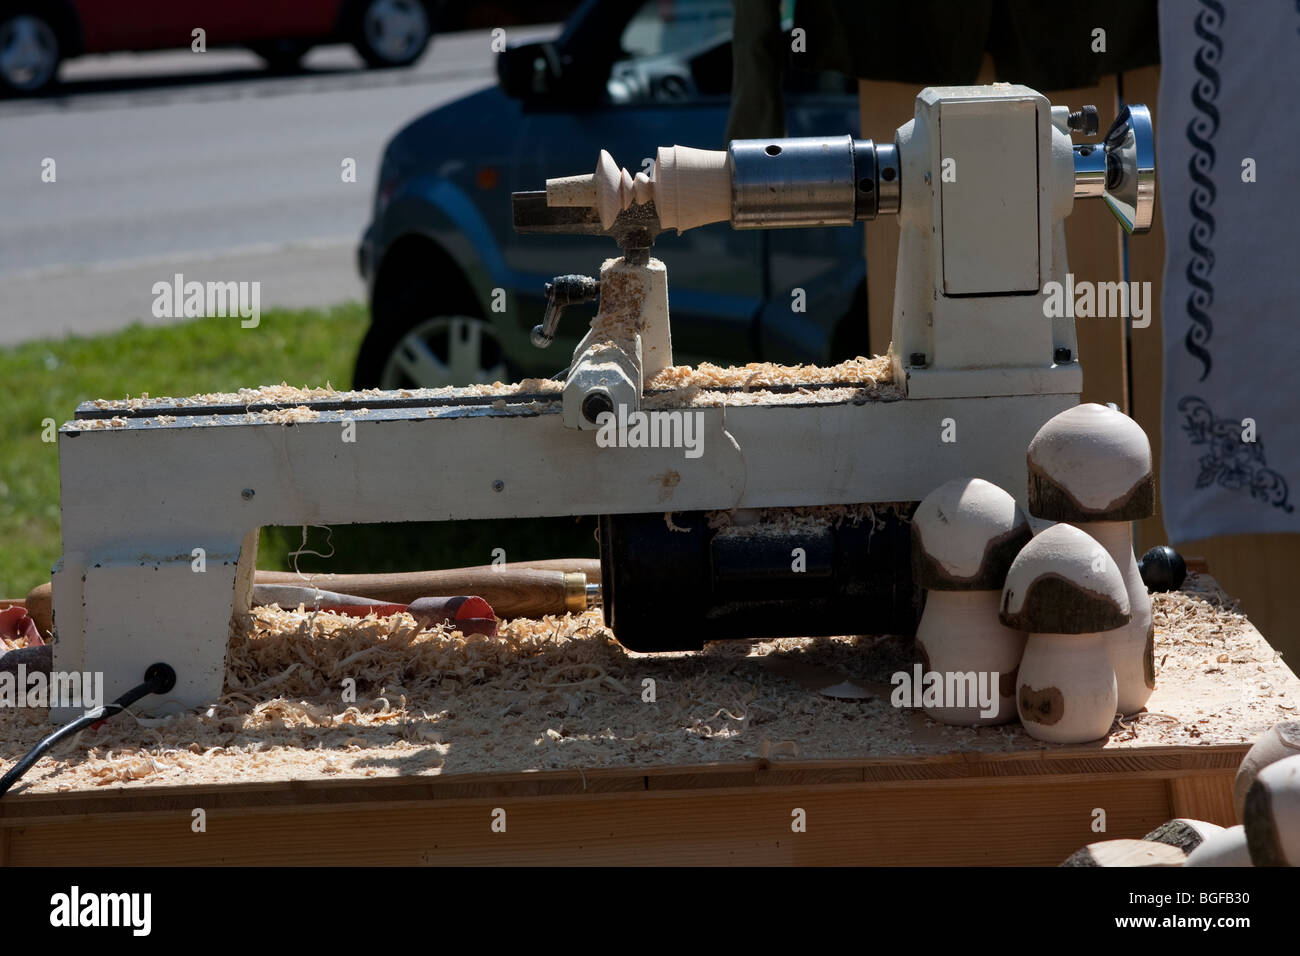 View of drill machine used to carve toys from wood in Bavaria, Germany Stock Photo